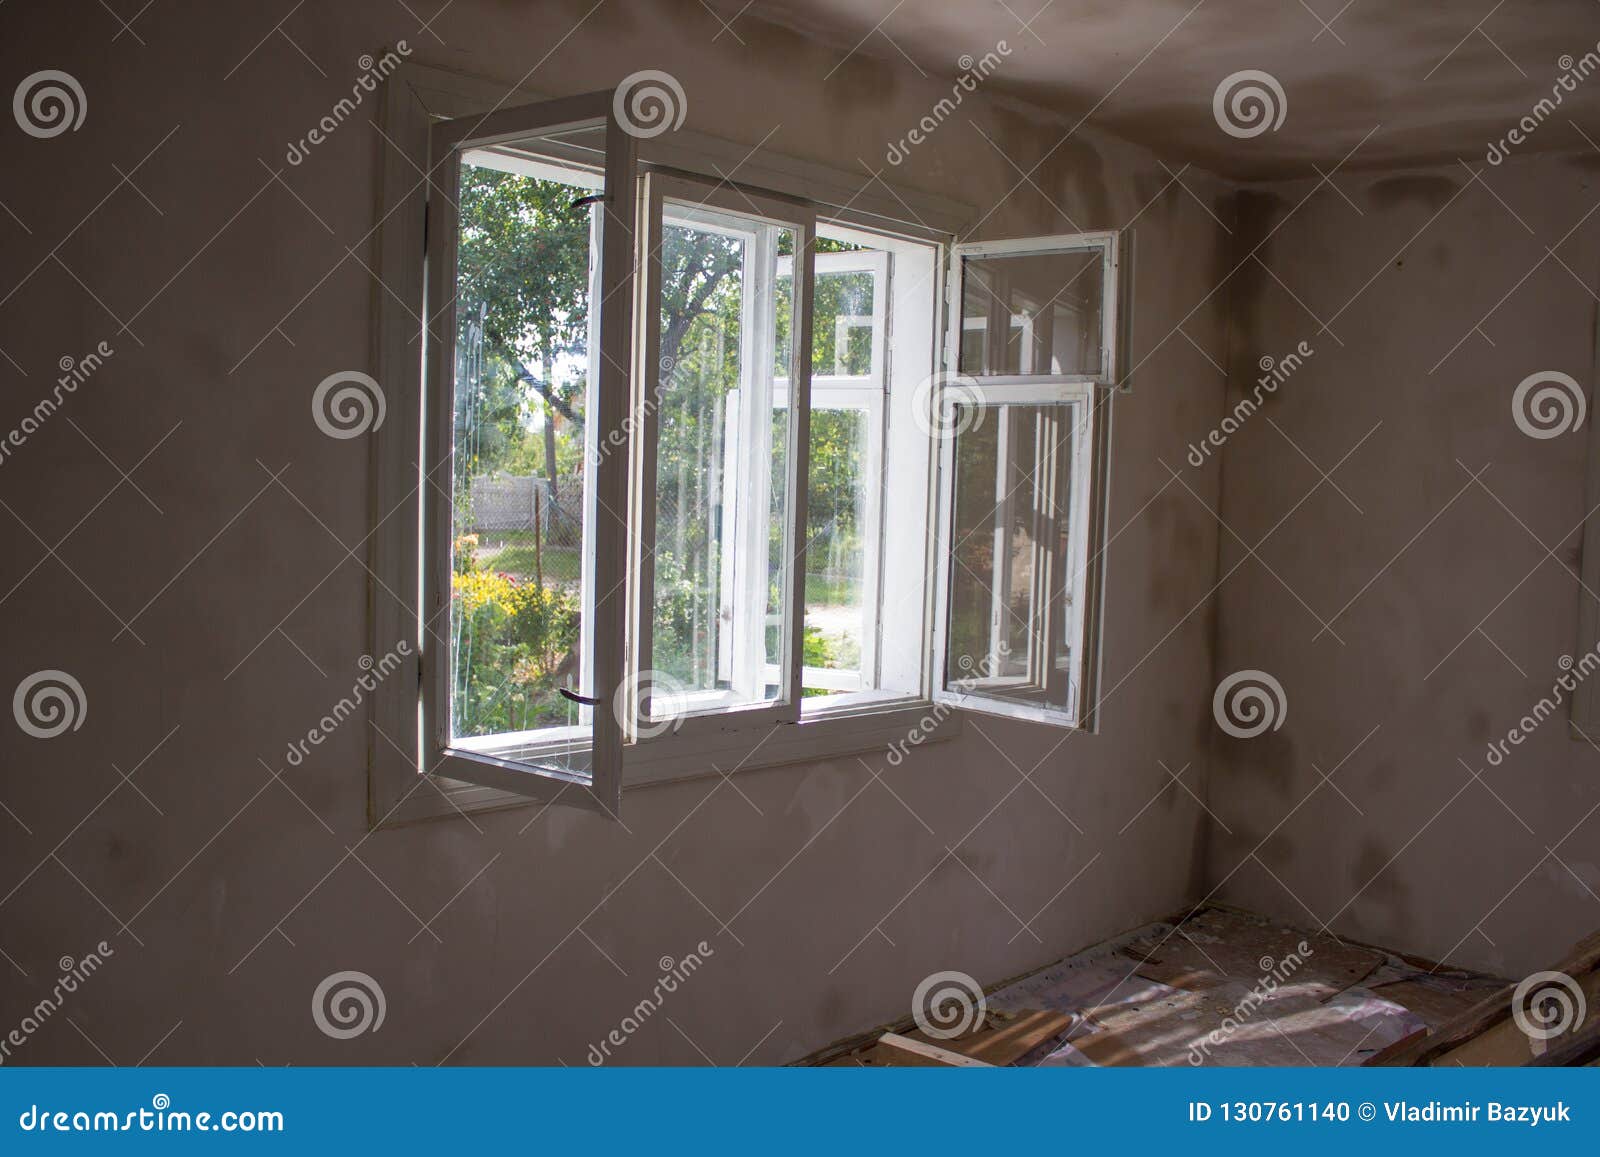 Open Window Repair In The Room Ventilate The Room After